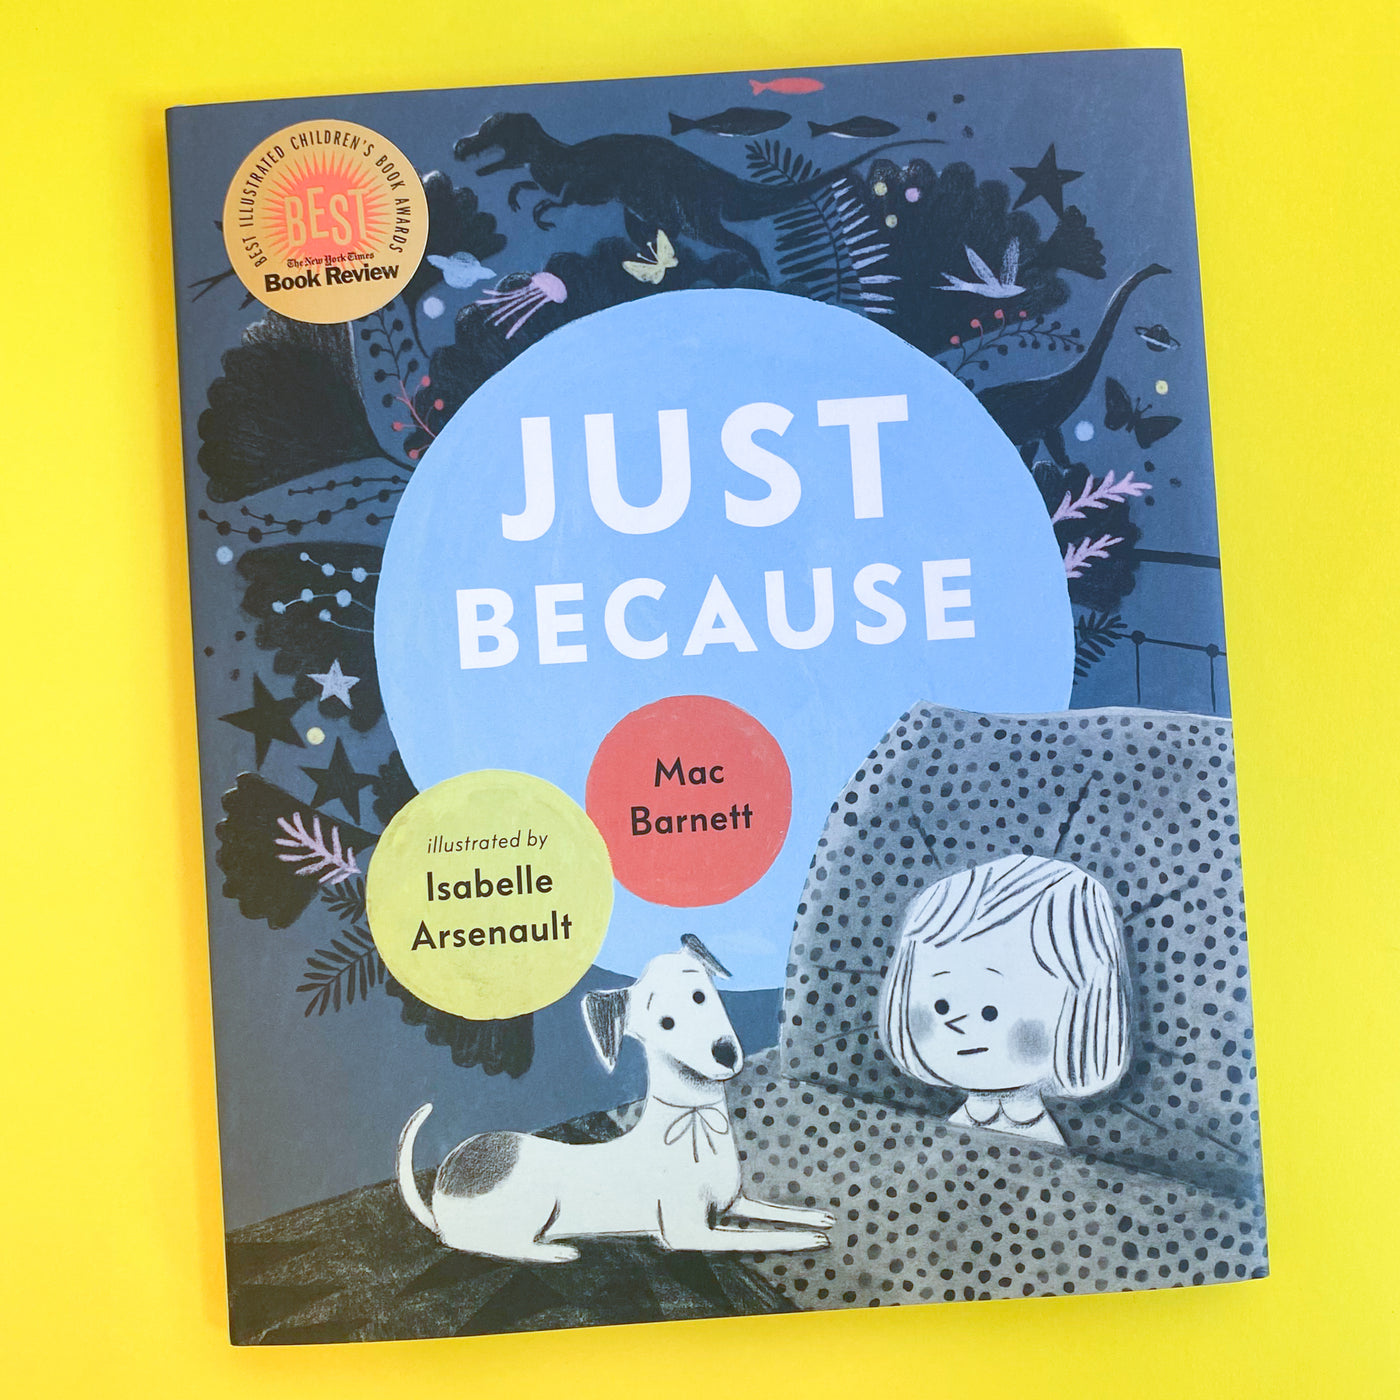 Just Because by Mac Barnett and Isabelle Arsenault